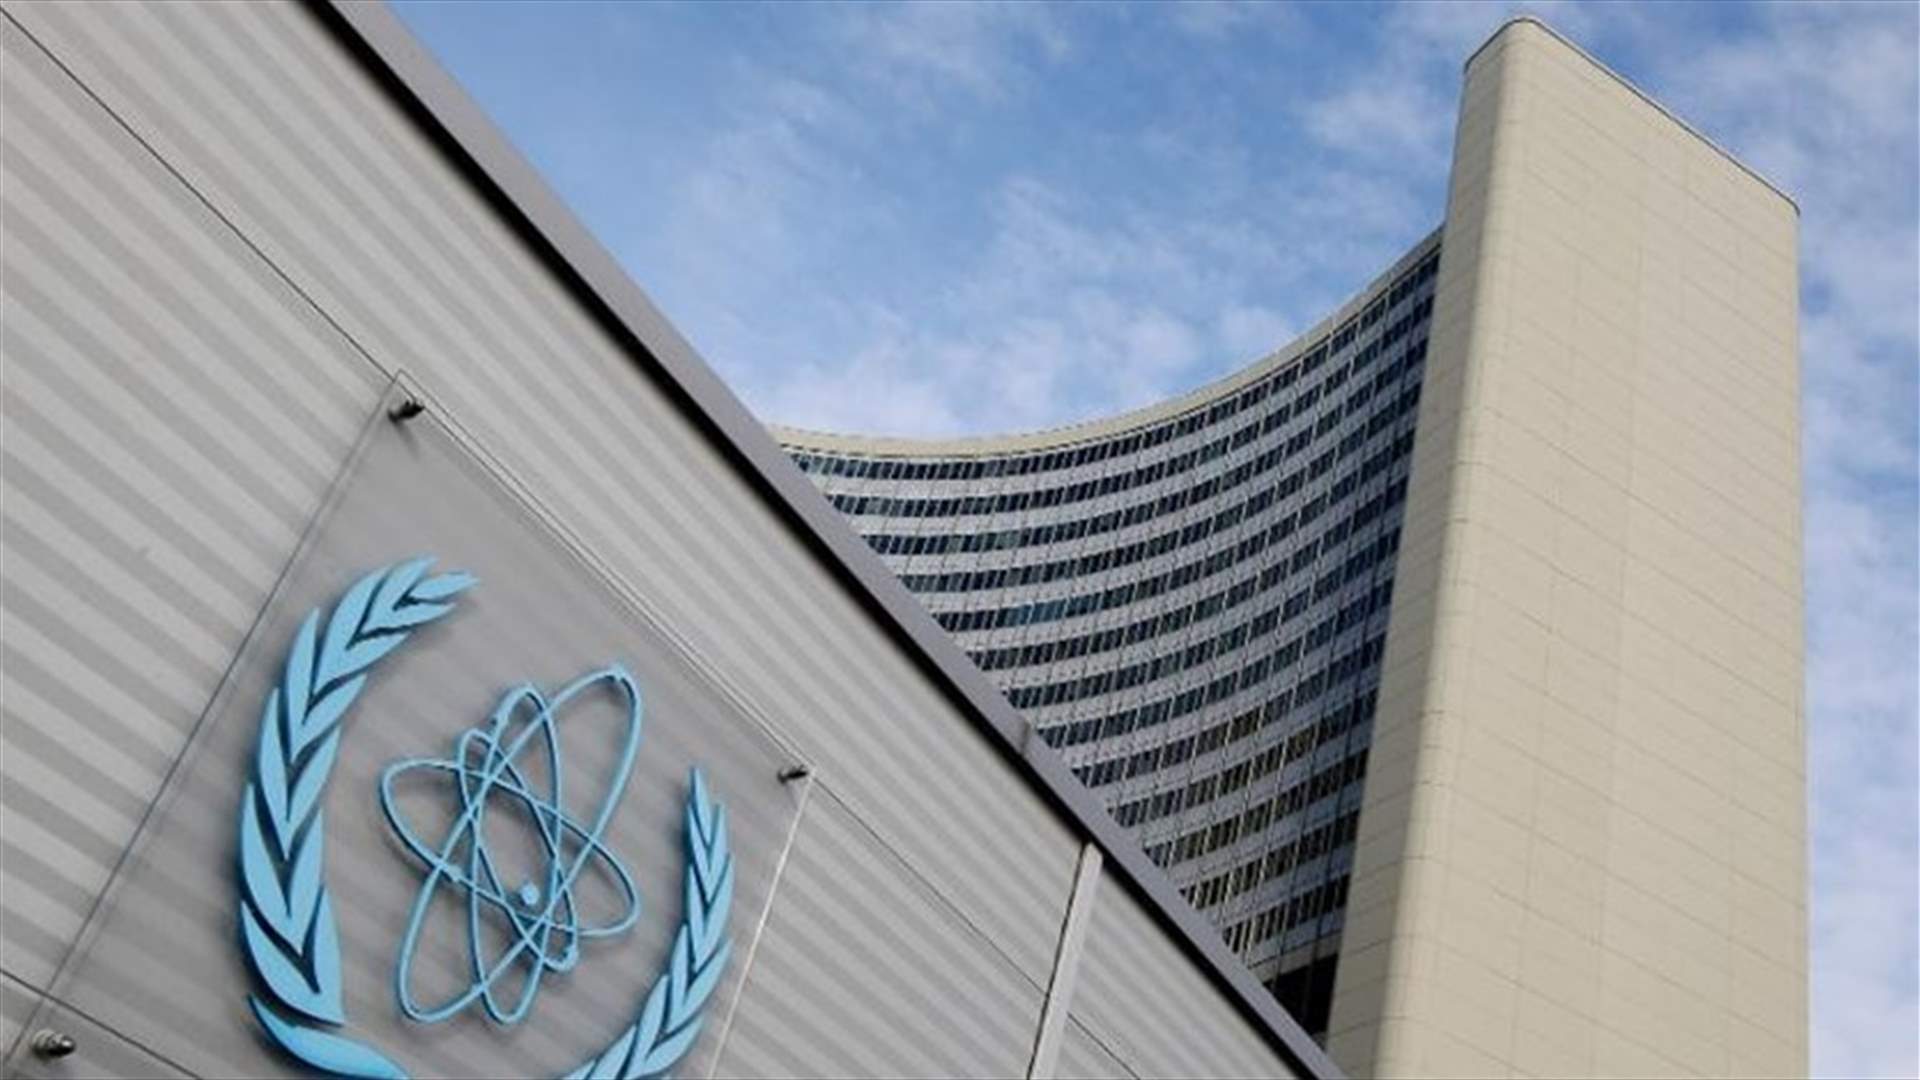 Iran honoring nuclear deal as new sanctions hit, IAEA report shows